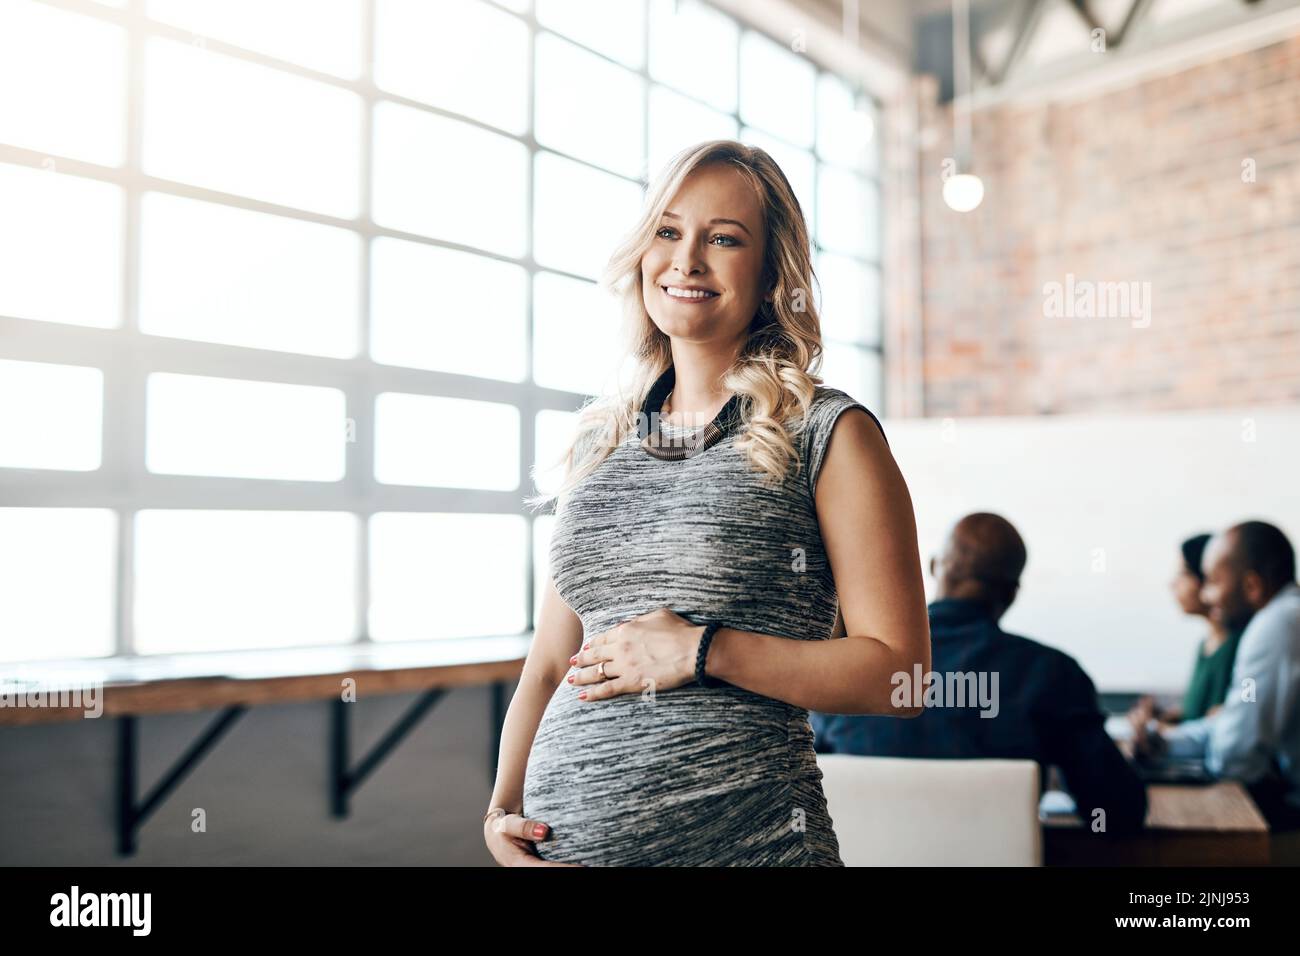 Pregnant business woman leader, working and smiling in a modern office during a meeting. Having one last meeting before her maternity leave starts Stock Photo